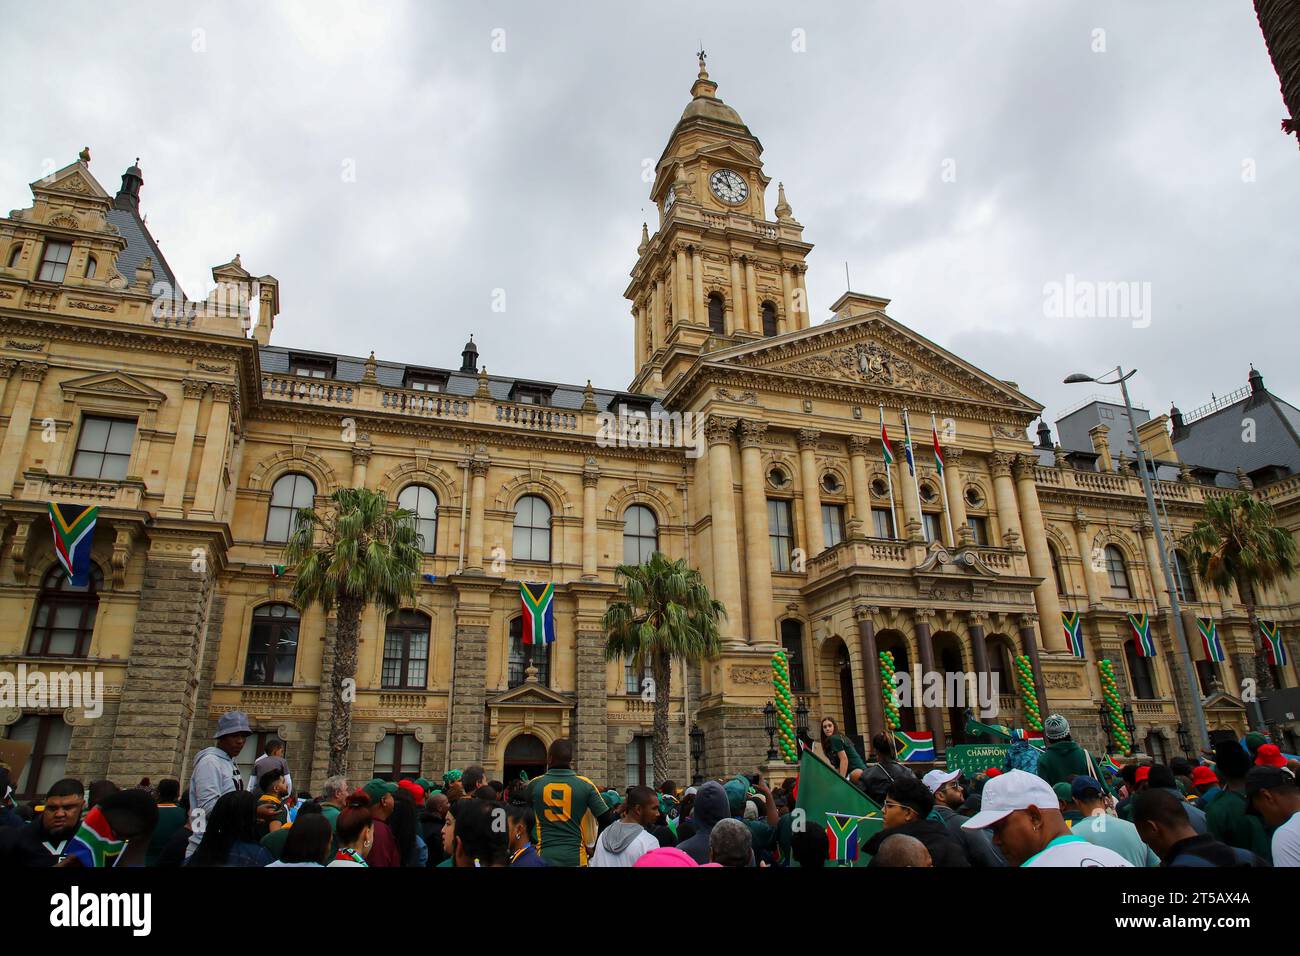 CAPE TOWN, SOUTH AFRICA - NOVEMBER 03: fans in front of the City Hall during the Springbok Trophy tour in Cape Town on November 03, 2023 in Cape Town, South Africa. The Springboks beat the New Zealand All Blacks 12-11 to win the Rugby World Cup in Paris, France on Saturday 28 October 2023. (Photo by Roger Sedres) Stock Photo